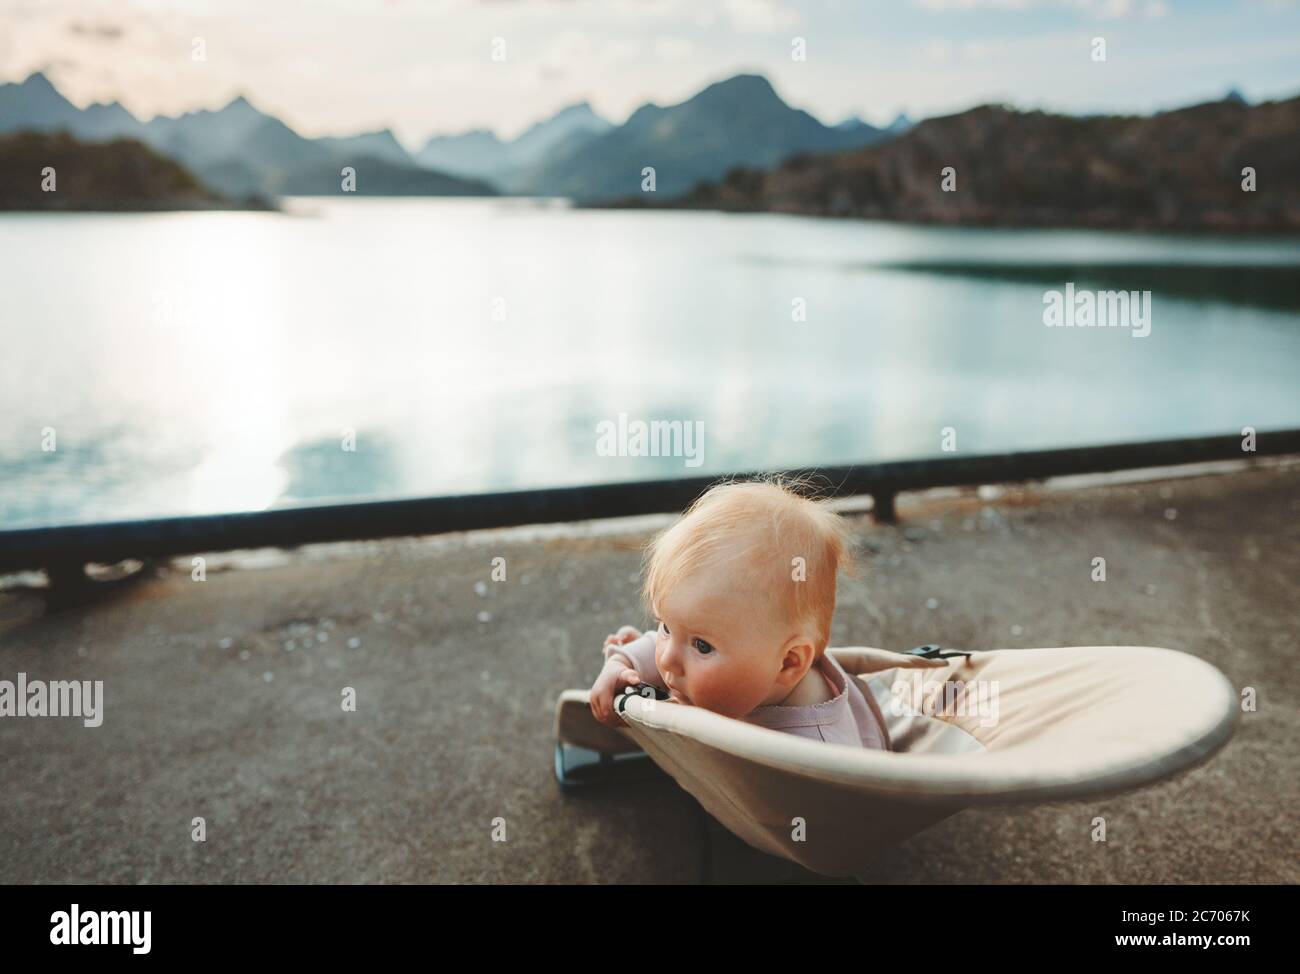 Child traveling in Norway family vacation lifestyle outdoor infant baby sitting in chair enjoying sunset mountains and fjord view Stock Photo